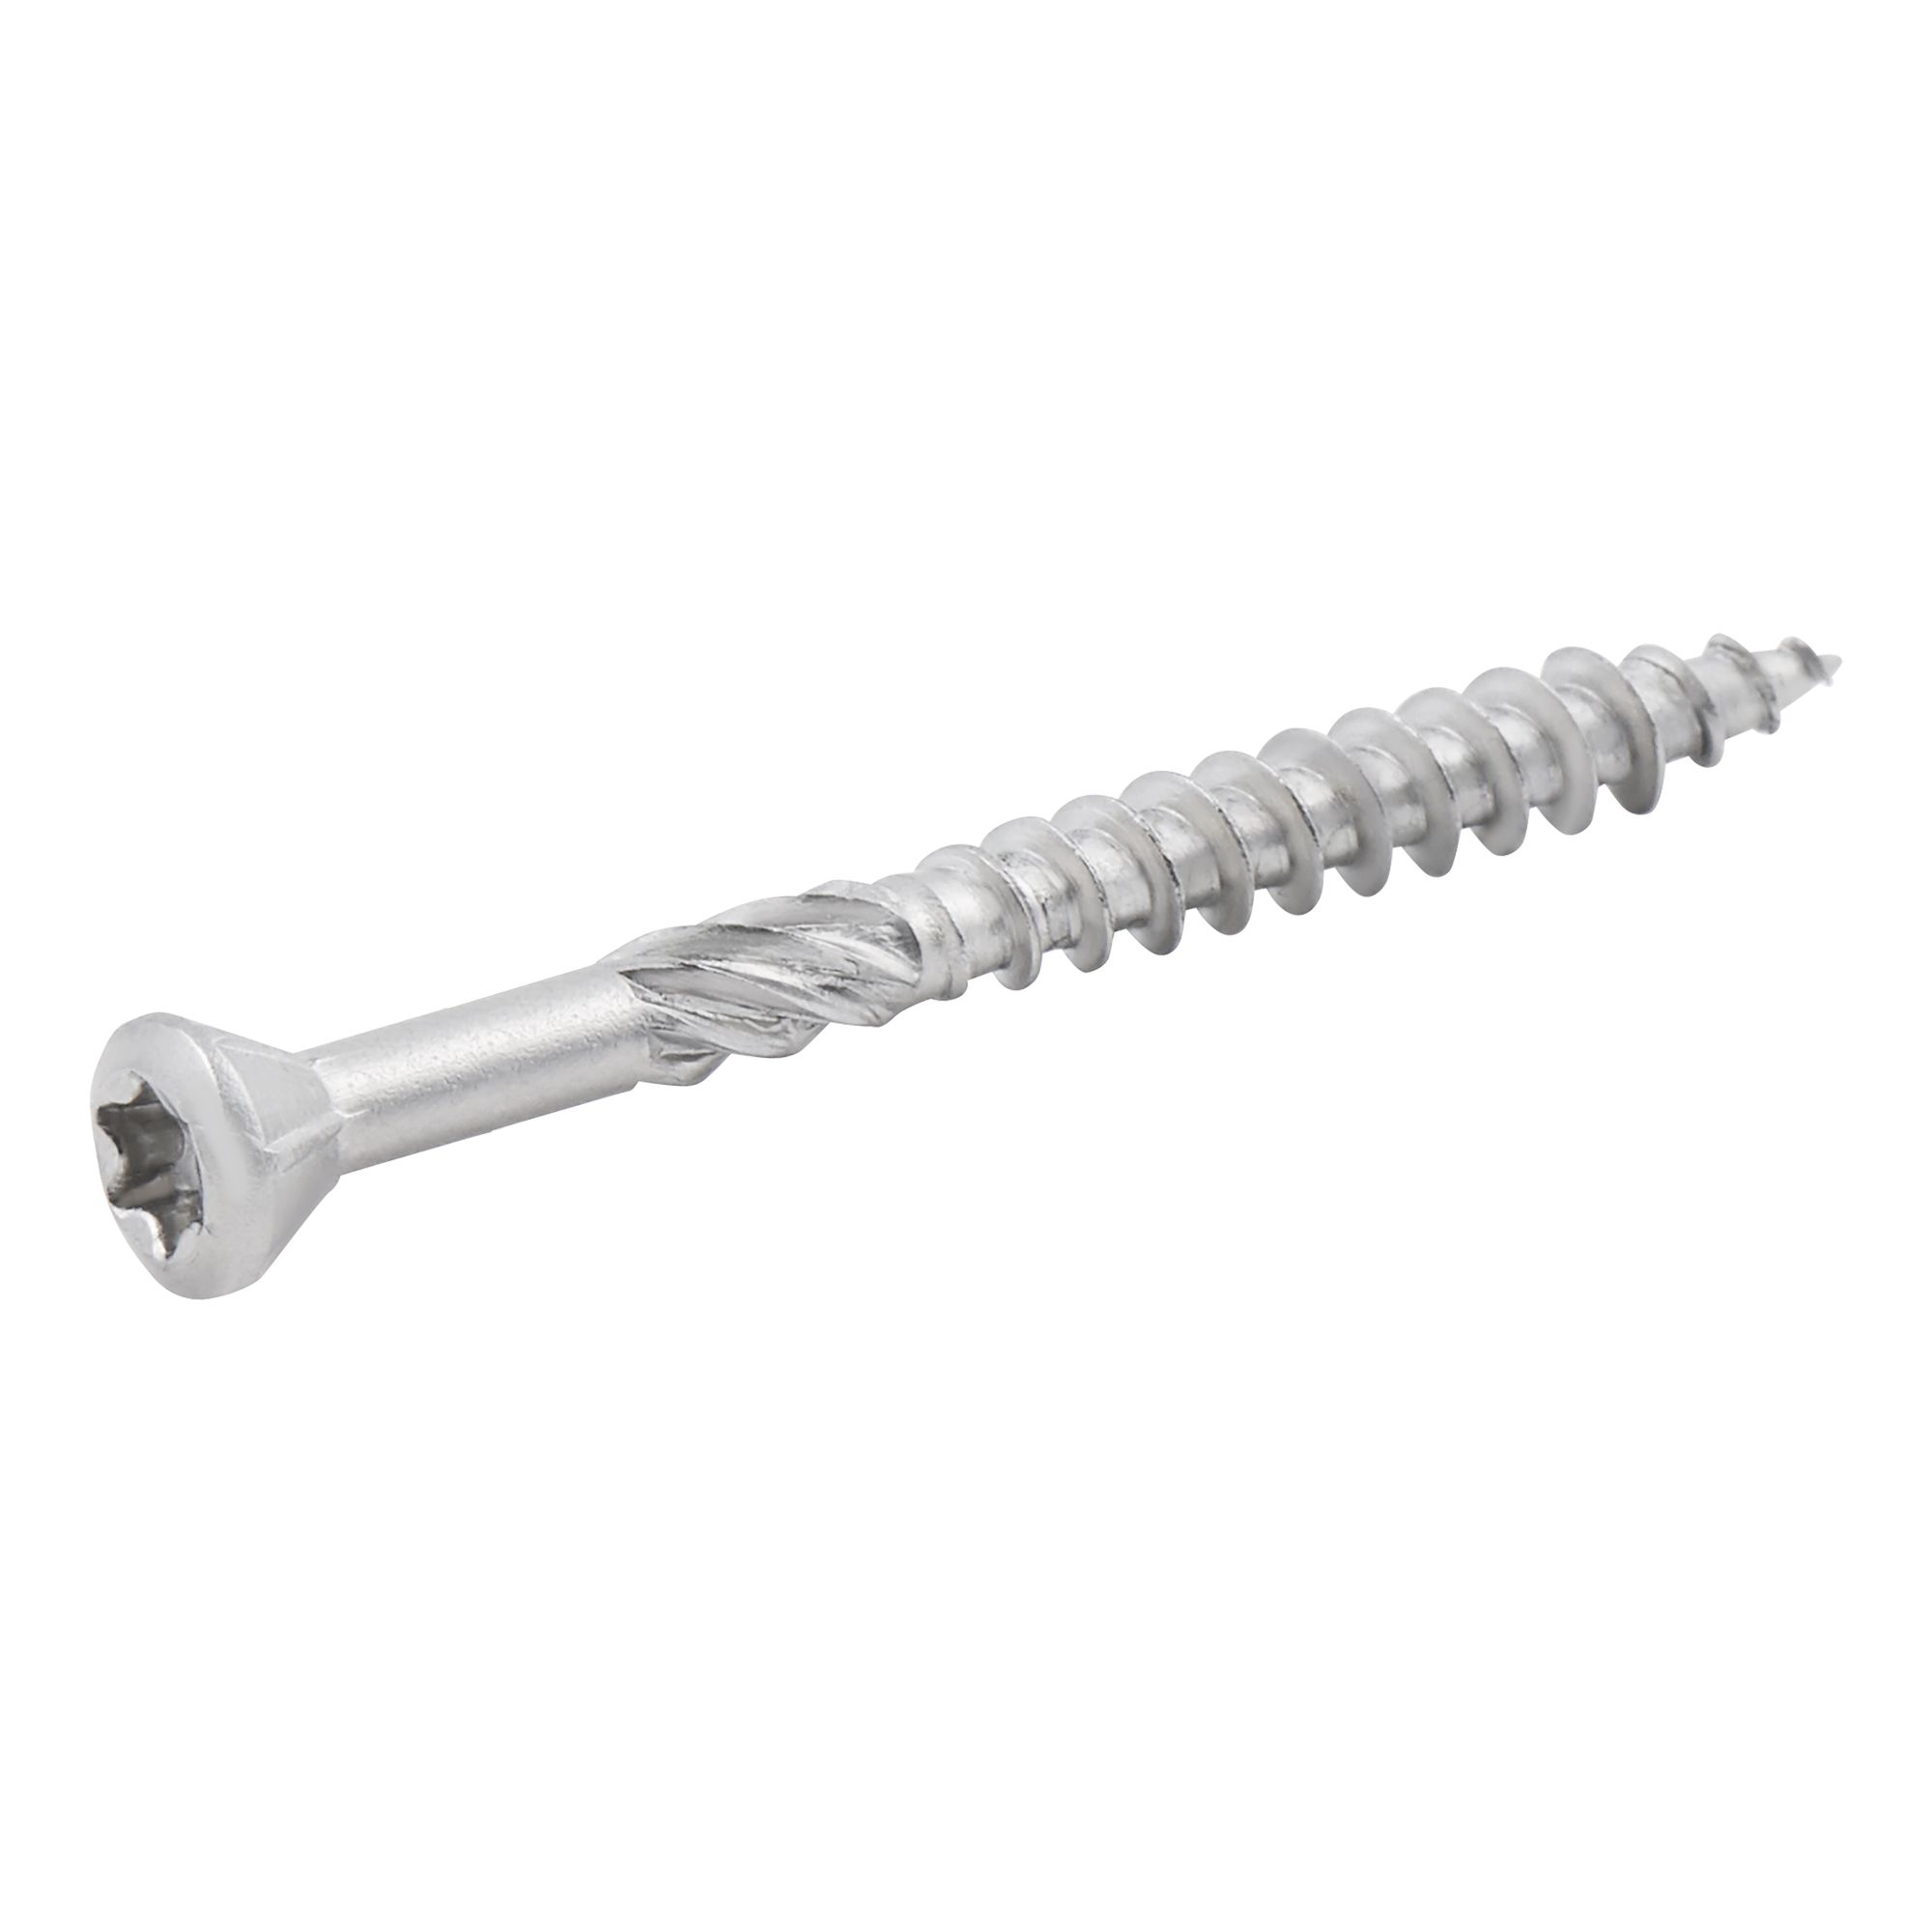 Turbodrive Stainless Steel A2 Decking Screw Dia5mm L60mm Pack Of